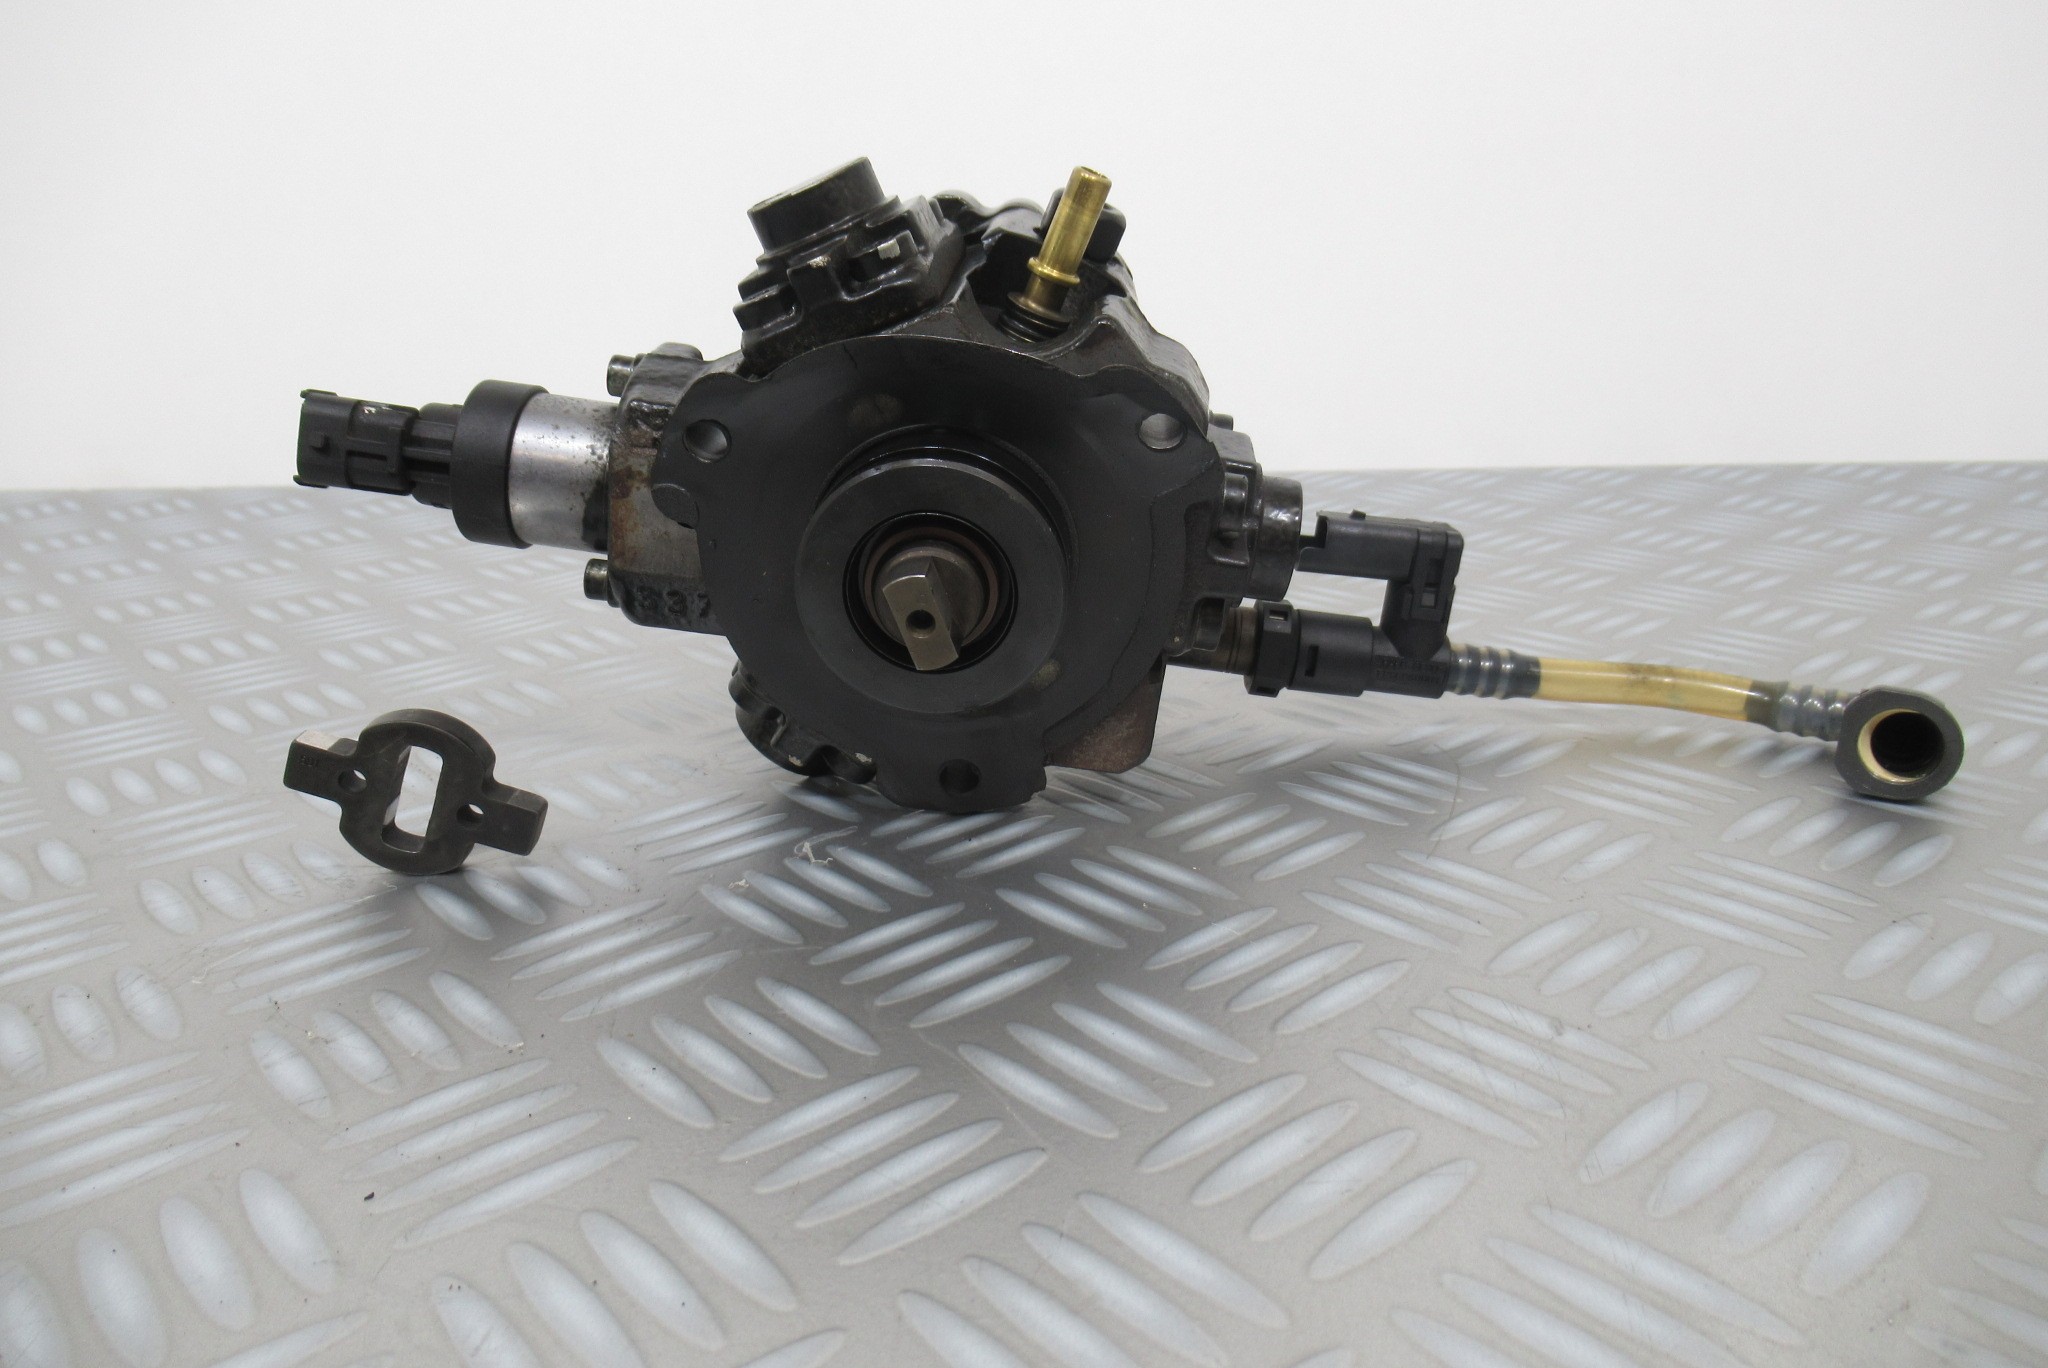 Pompe injection Bosch Peugeot 4007 2,2 HDI 0445010139 / 9683268980 – Recycl  Auto 60